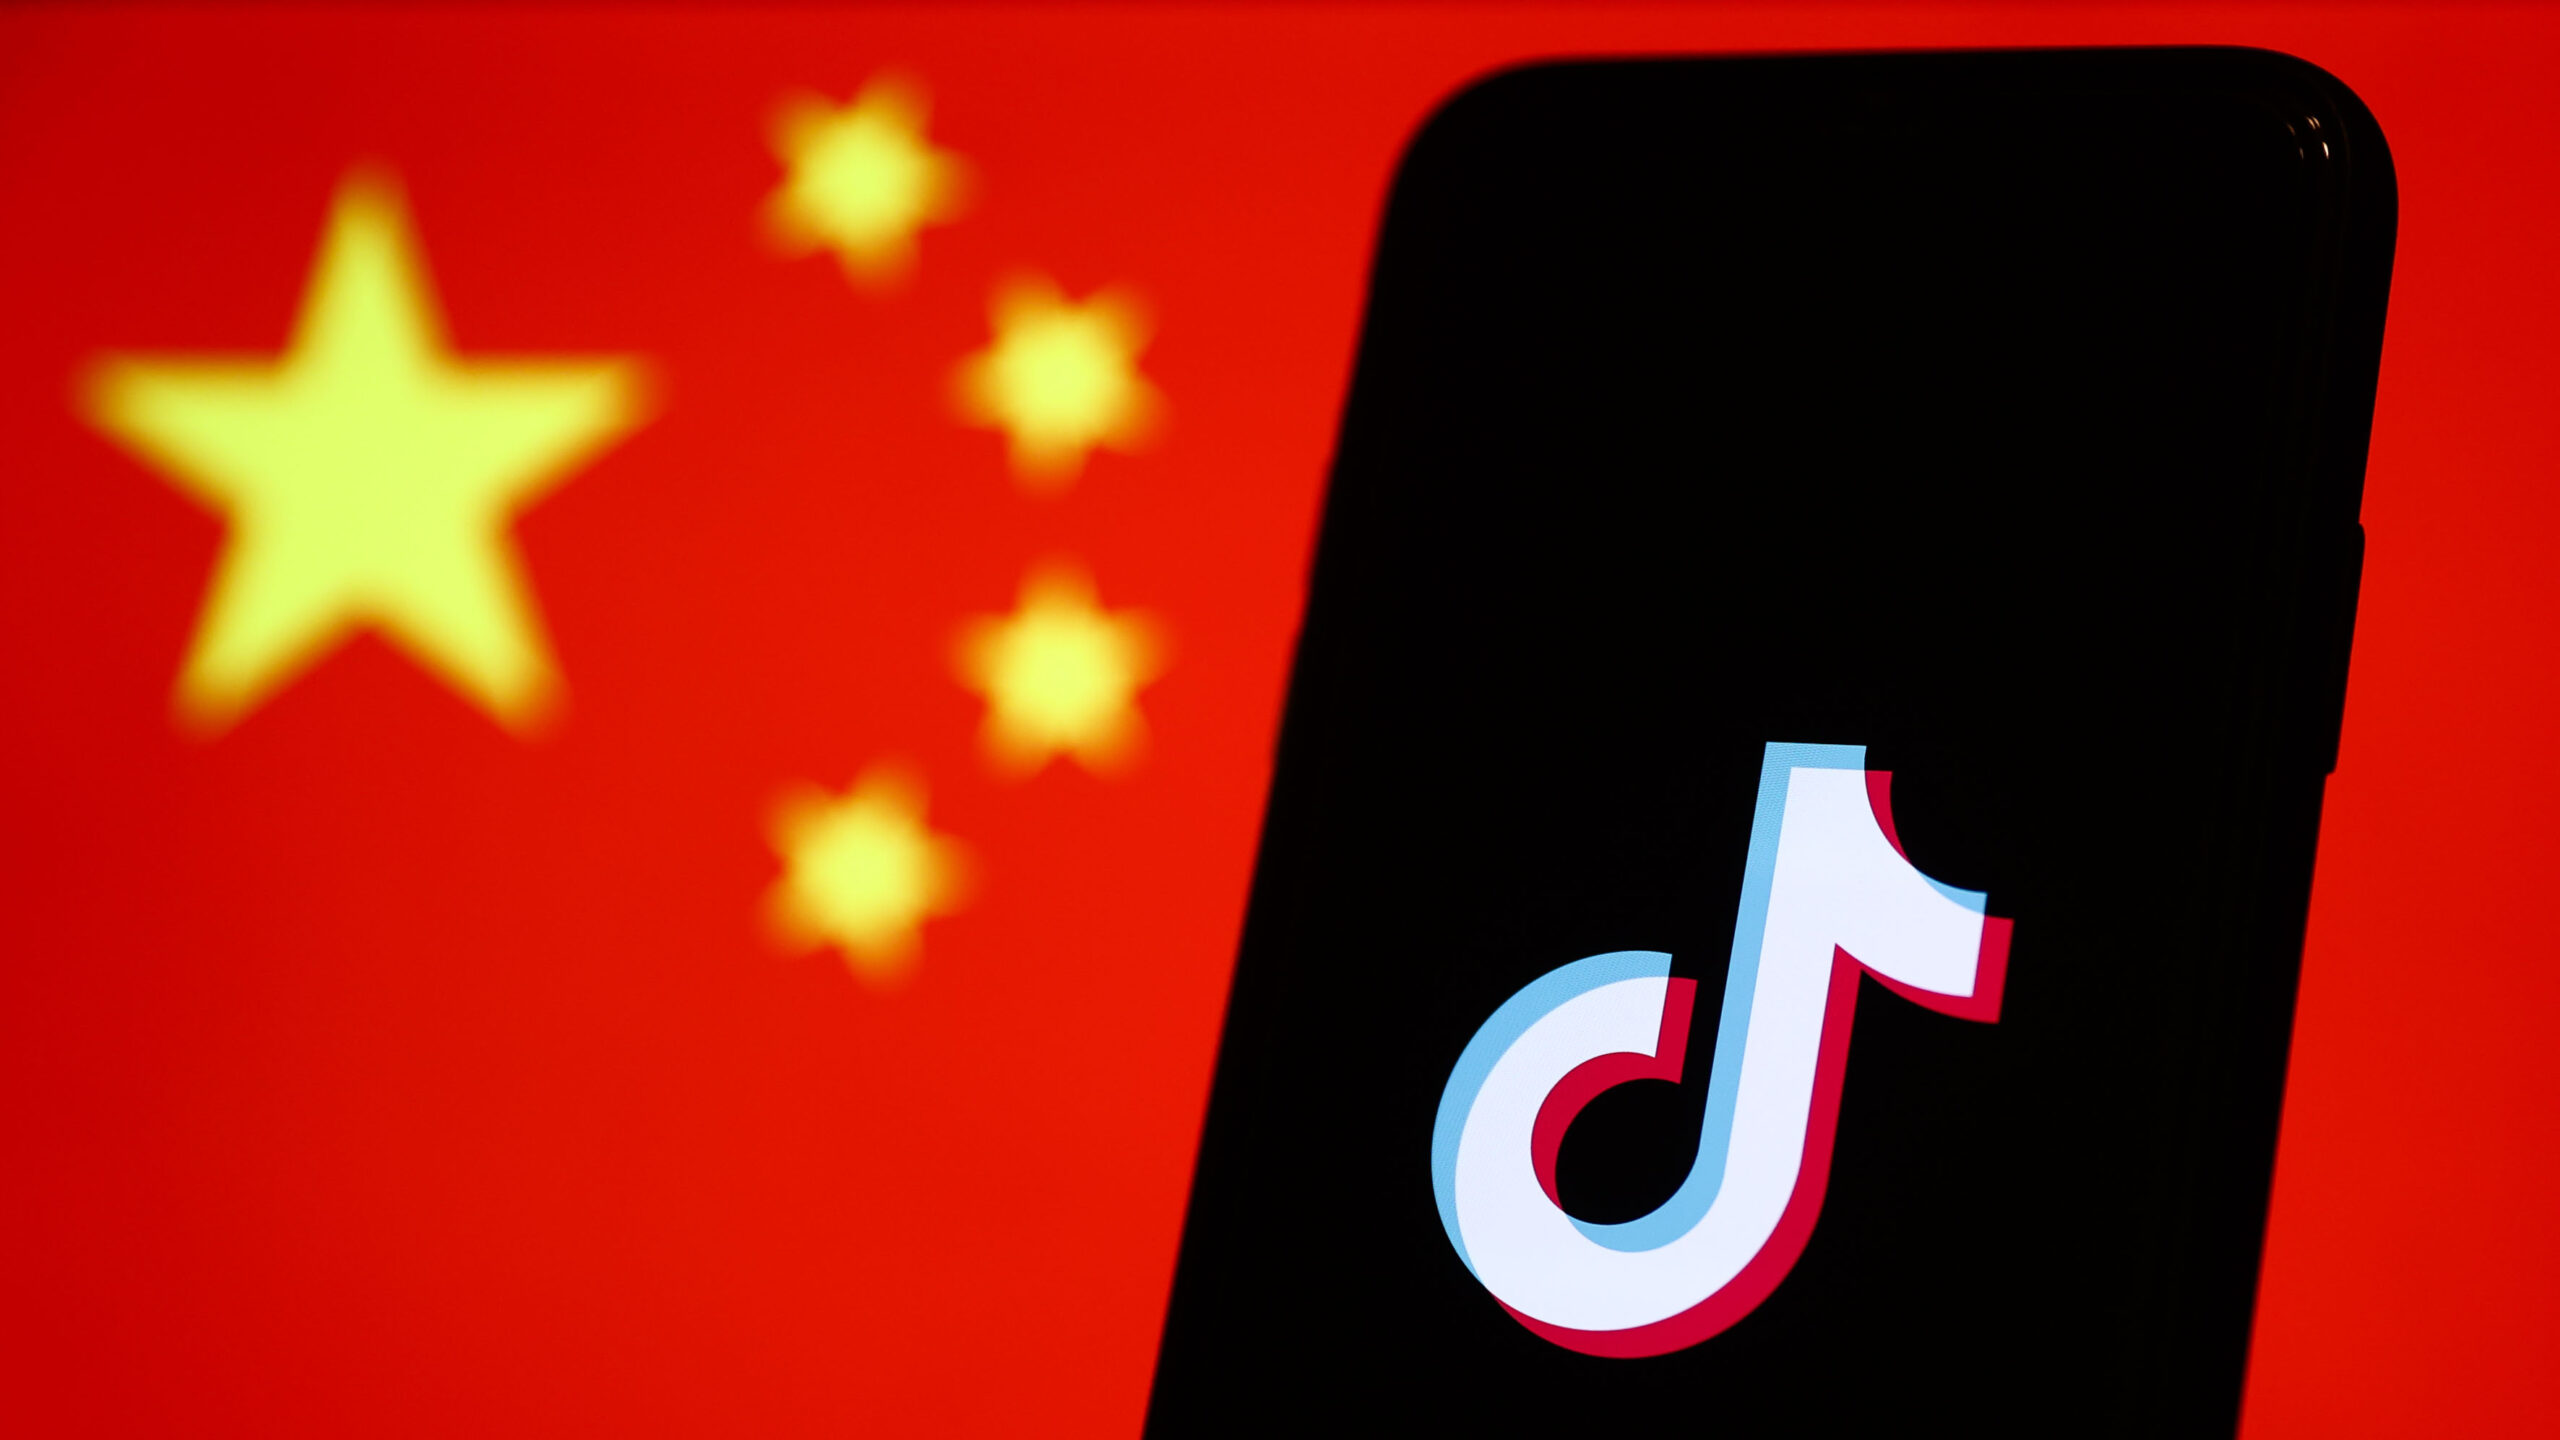 ‘A National Security Concern’: Top Democrat Senator Calls For China’s TikTok To Be Banned In U.S.